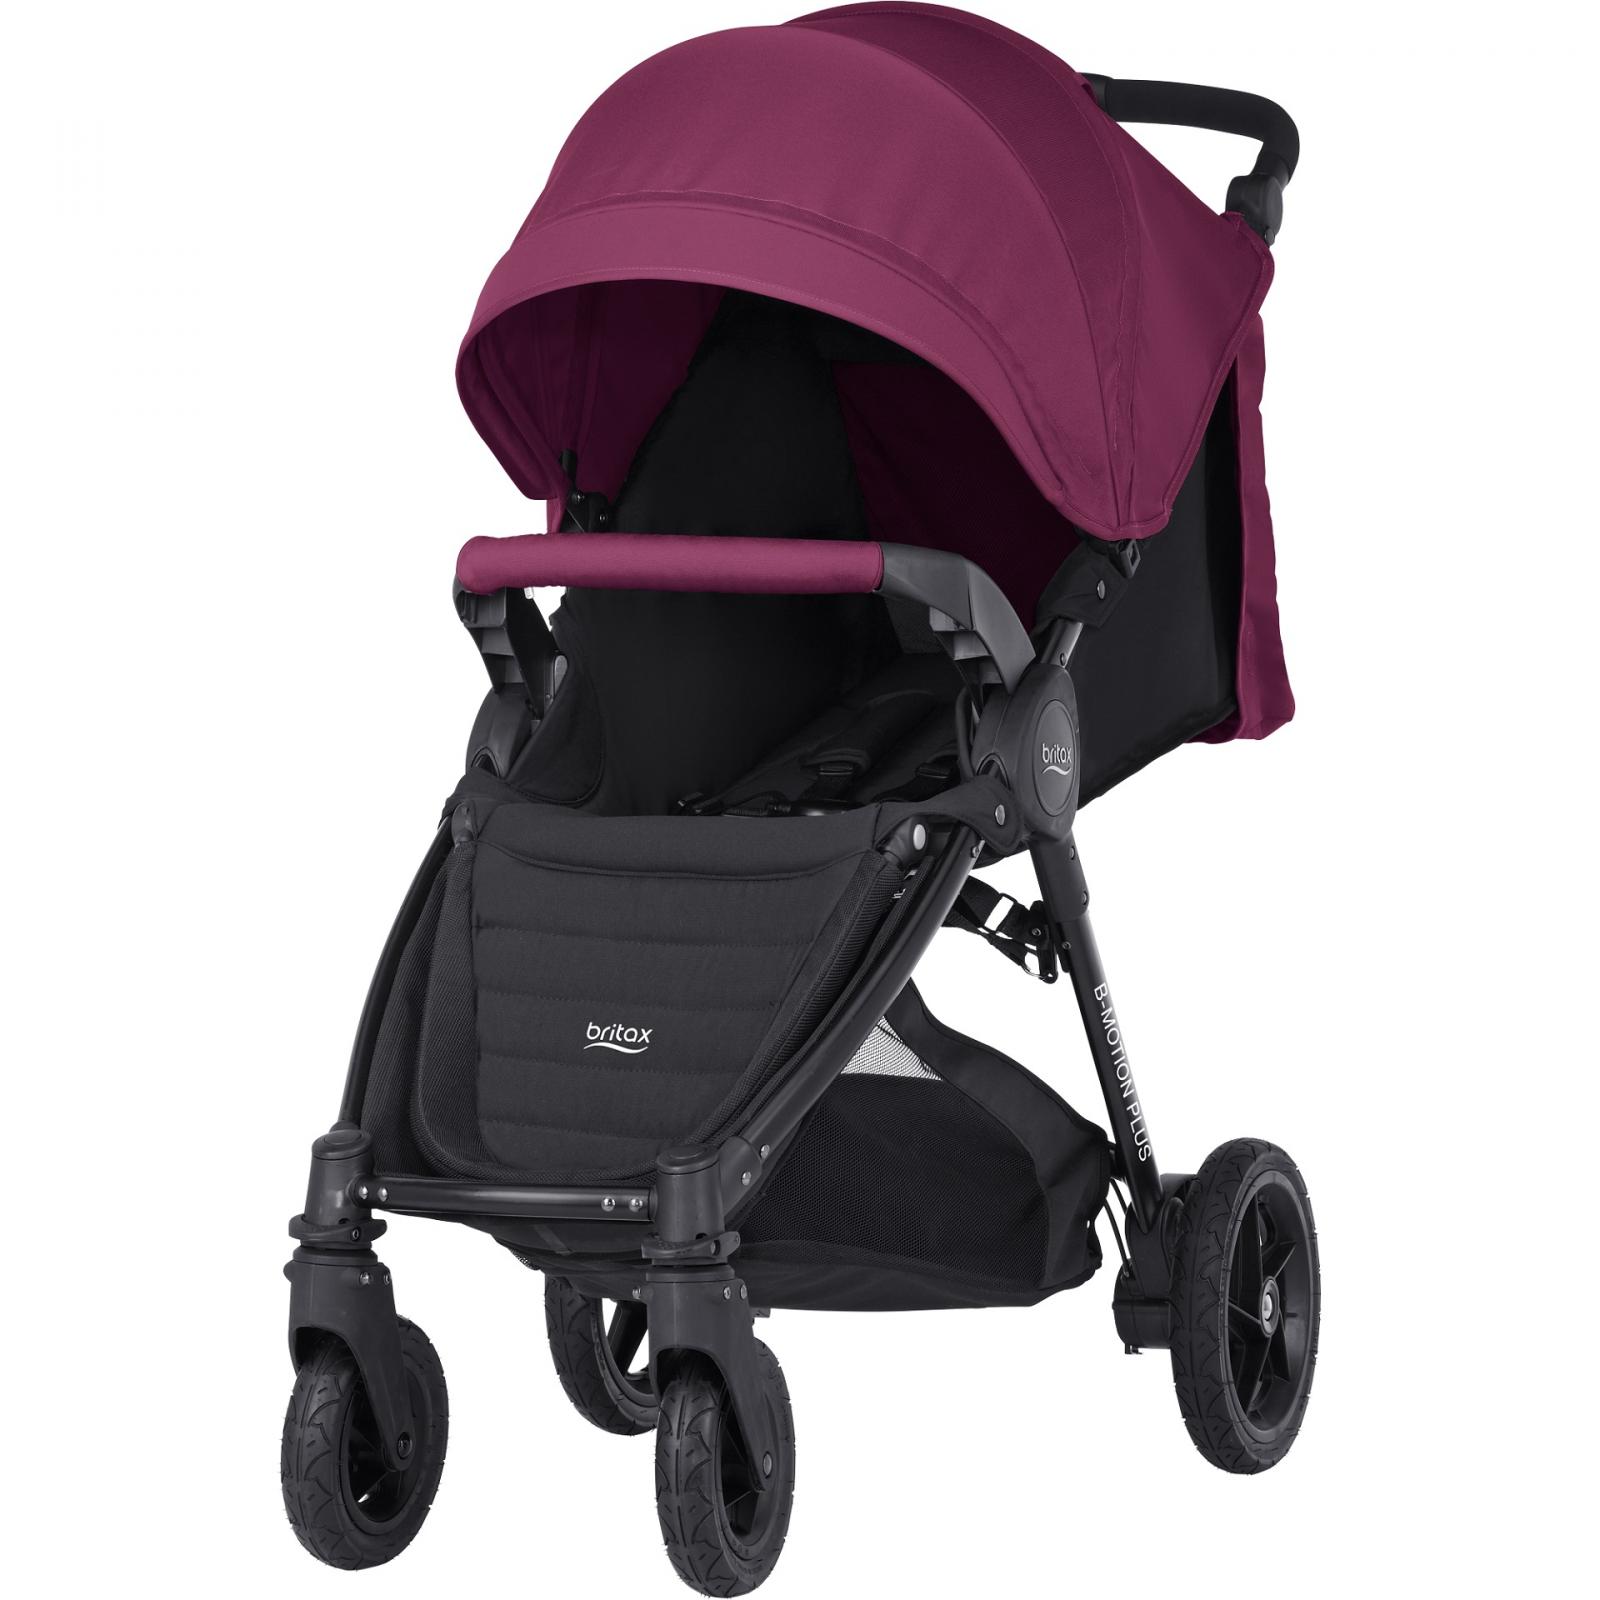 Buggy Liner fit for Britax Motion 3 4 